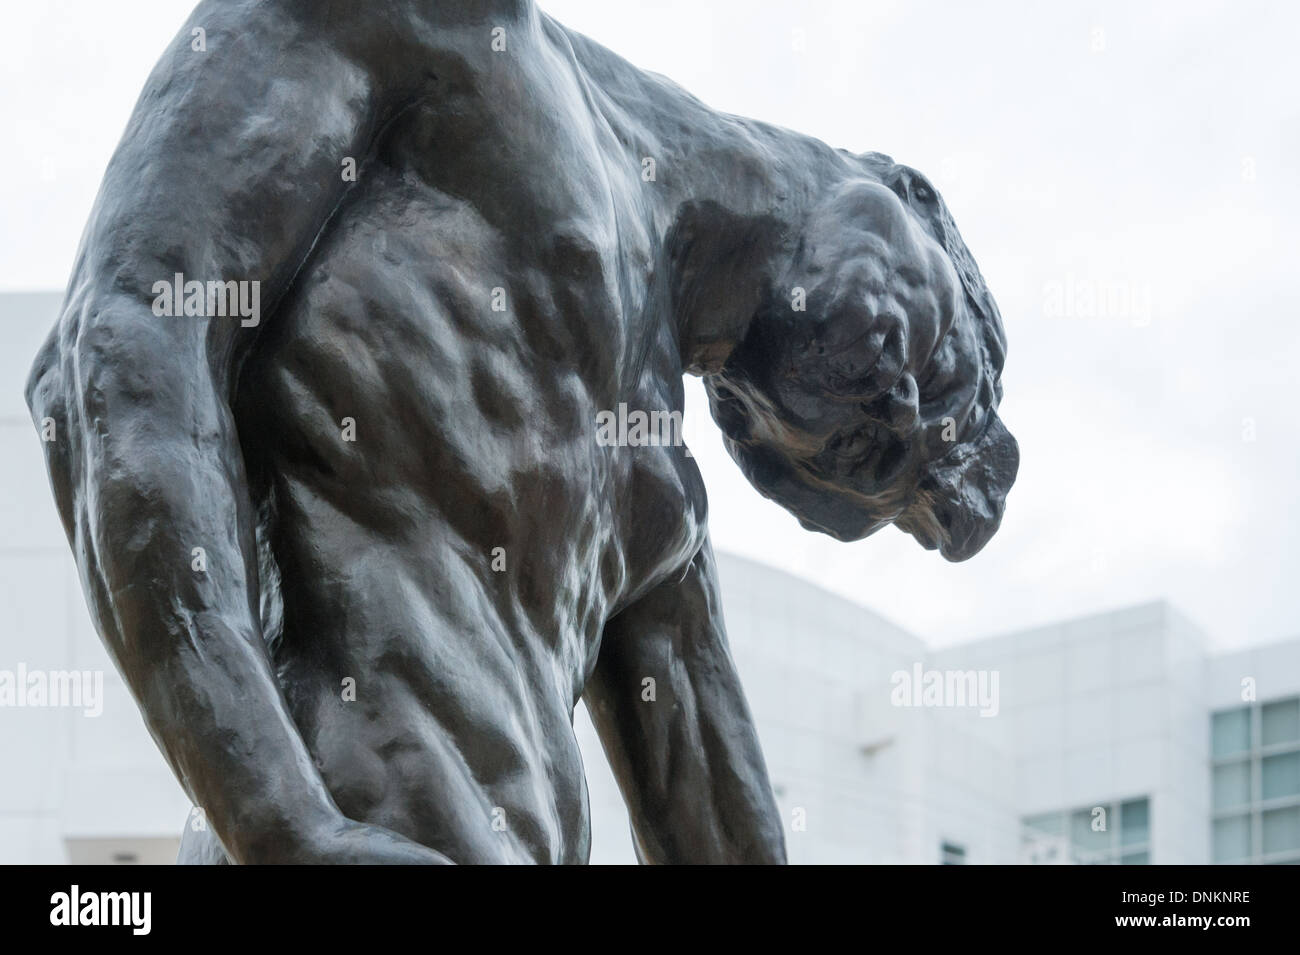 Figurative sculpture entitled 'The Shade' by Auguste Rodin at the High Museum of Art in Atlanta, Georgia. (USA) Stock Photo